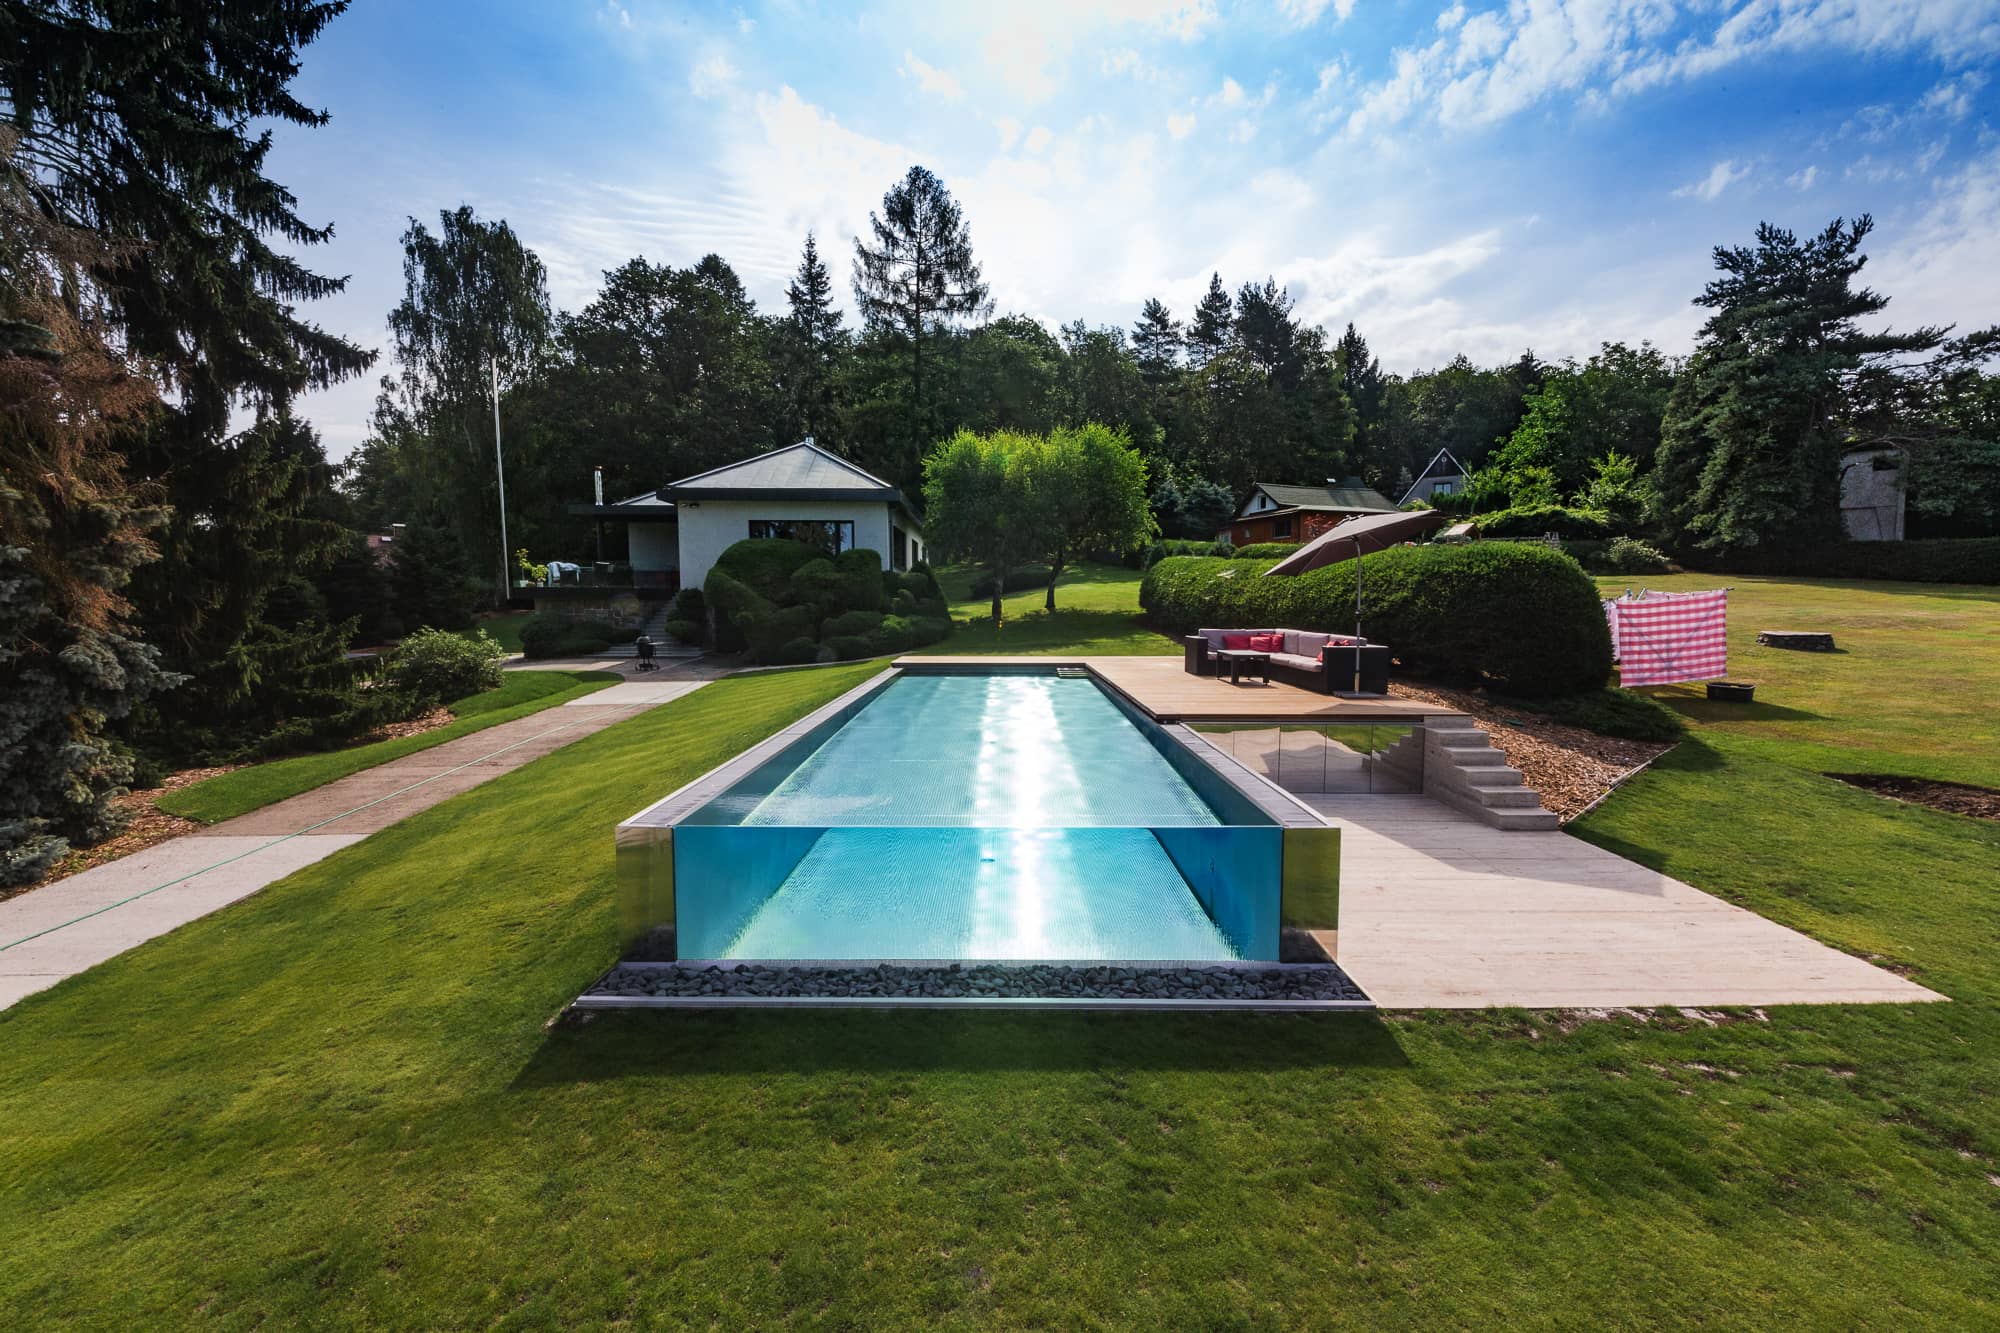 Stainless-Steel Swimming Pool with Overflow Above a Glass Partition